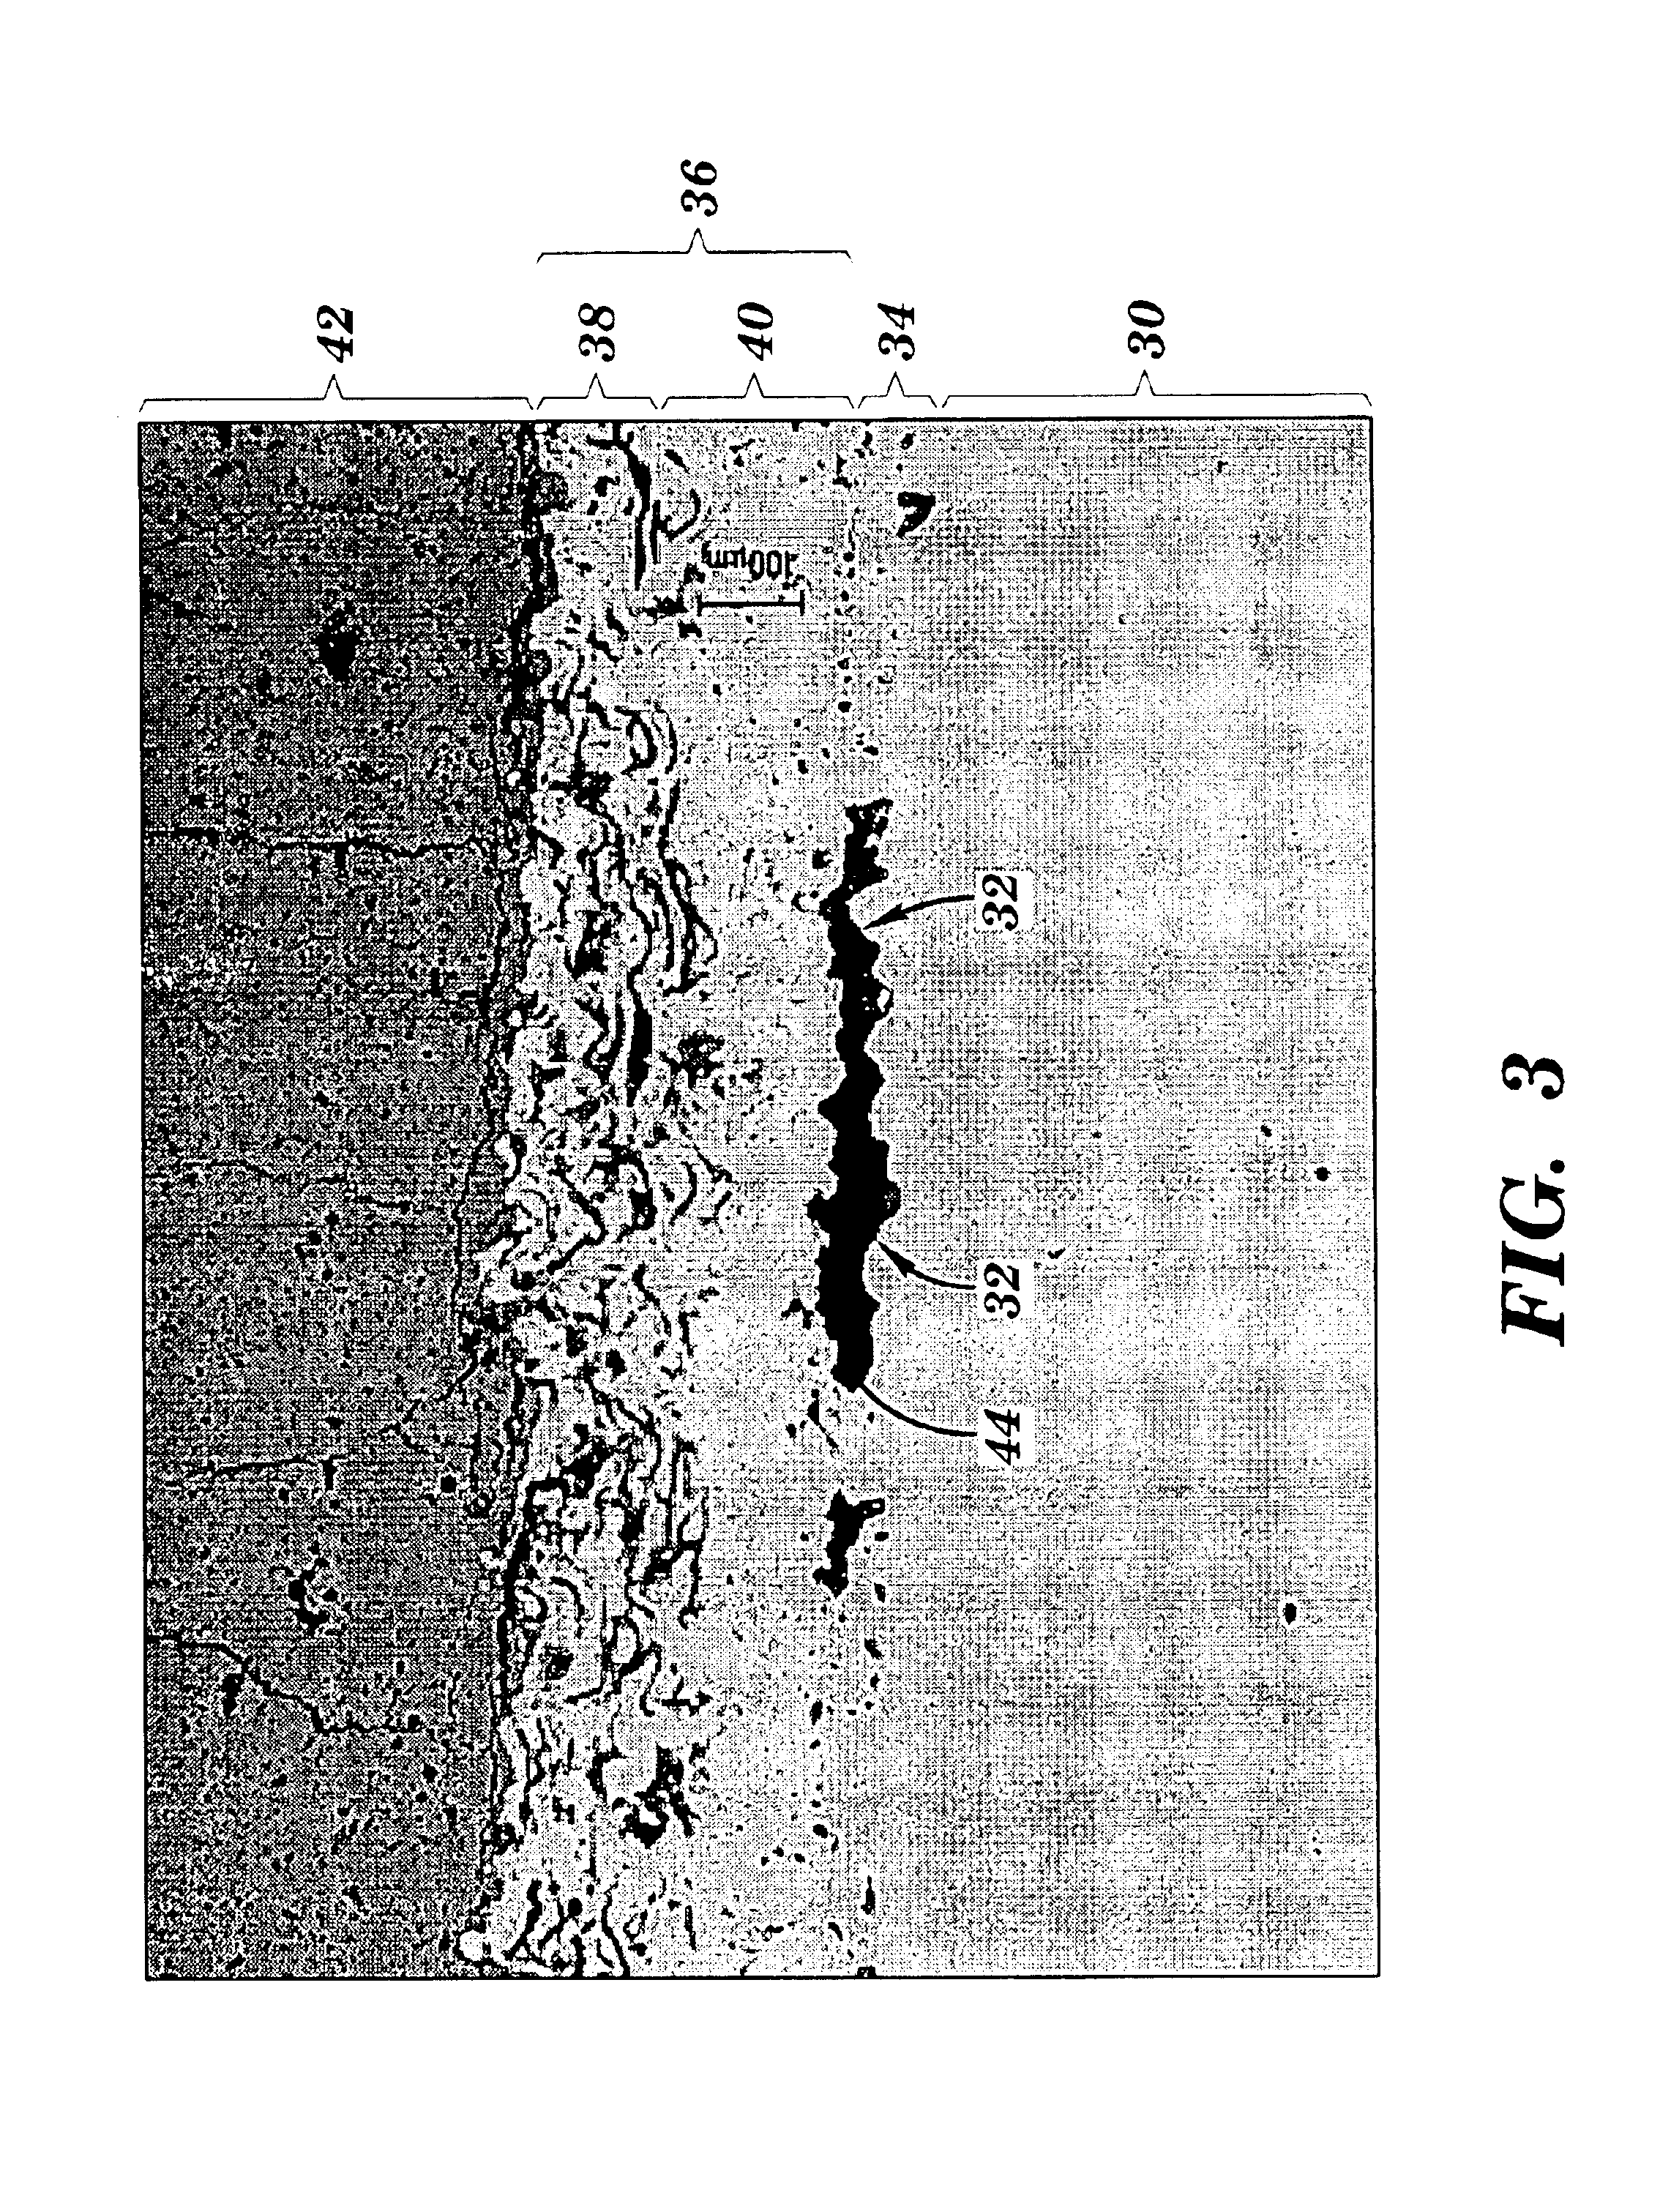 Method for forming a channel on the surface of a metal substrate